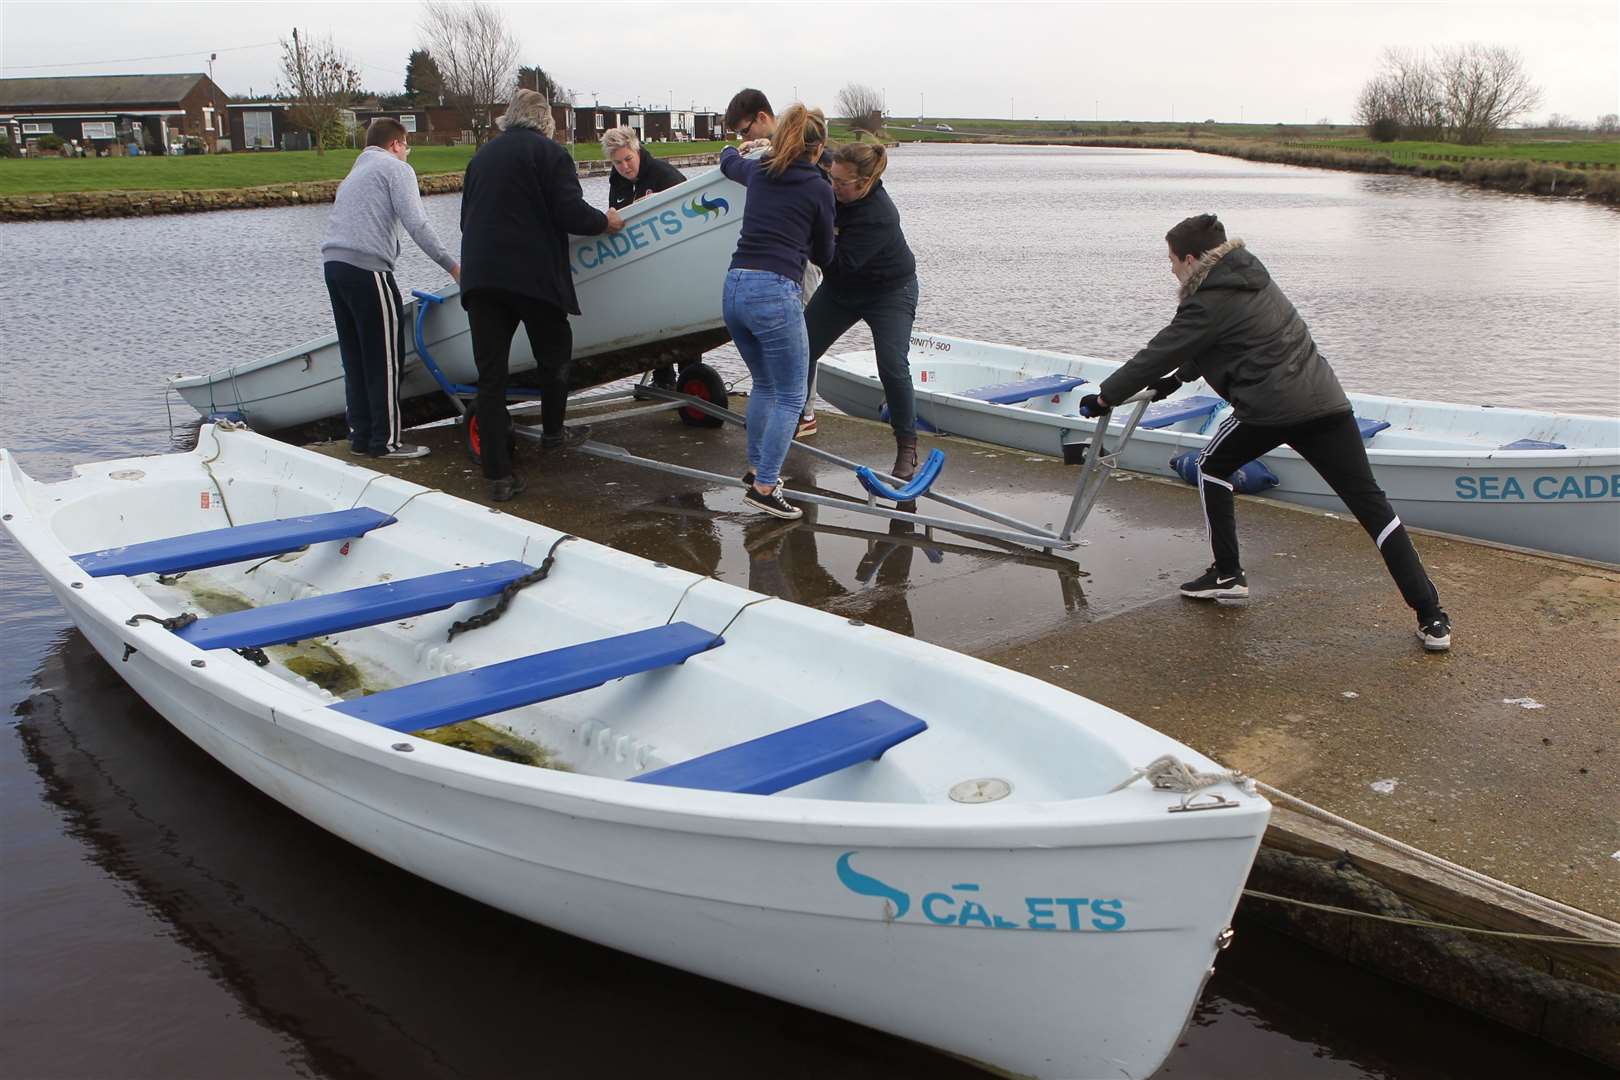 Sheppey Sea Cadets check their boats at Barton's Point. Picture: John Westhrop